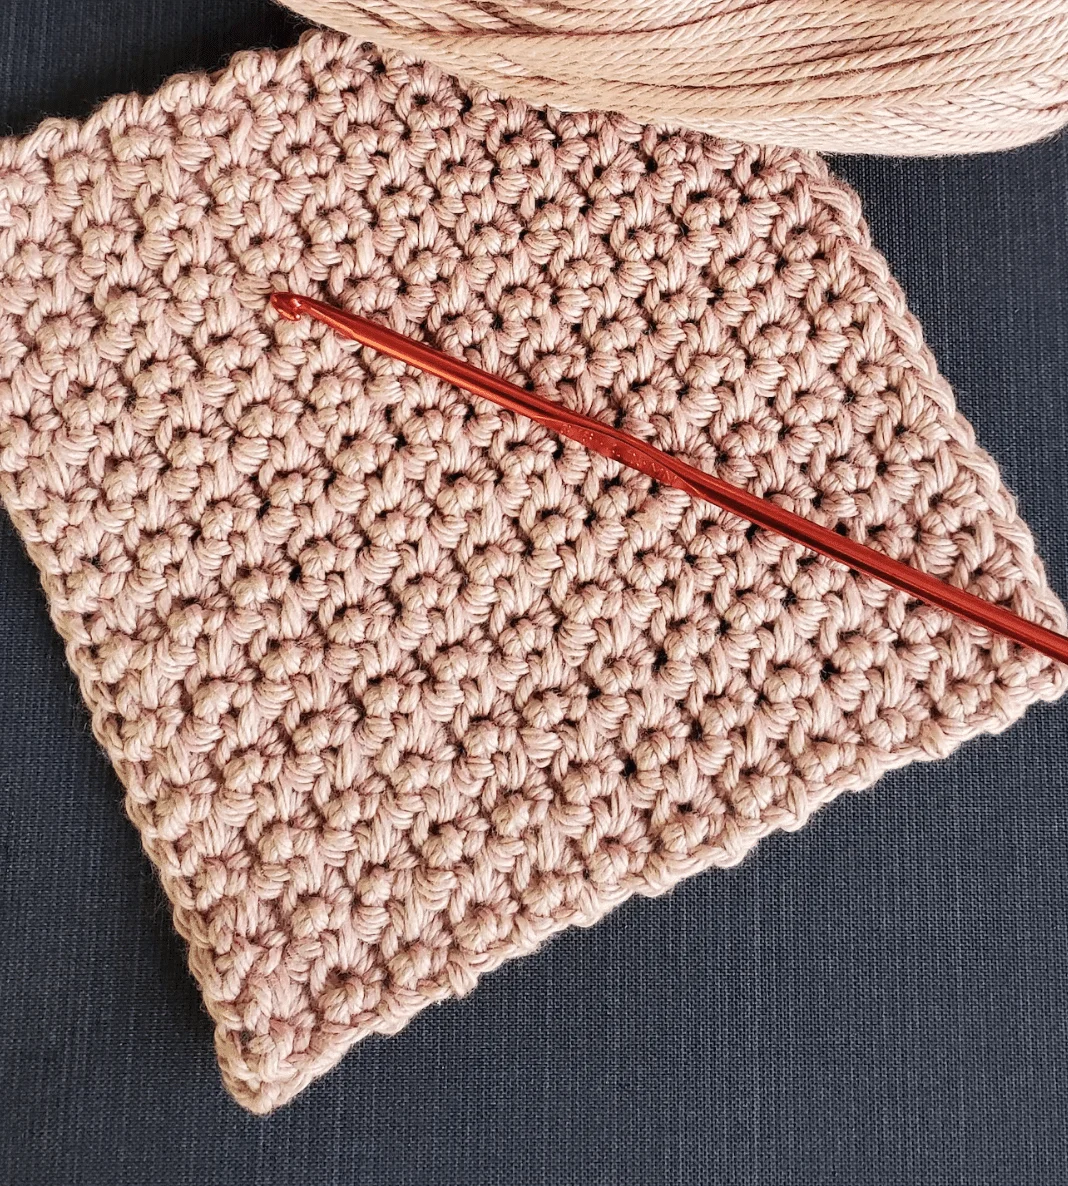 A beginner crochet kit featuring a crocheted square, crochet hook, and yarn.